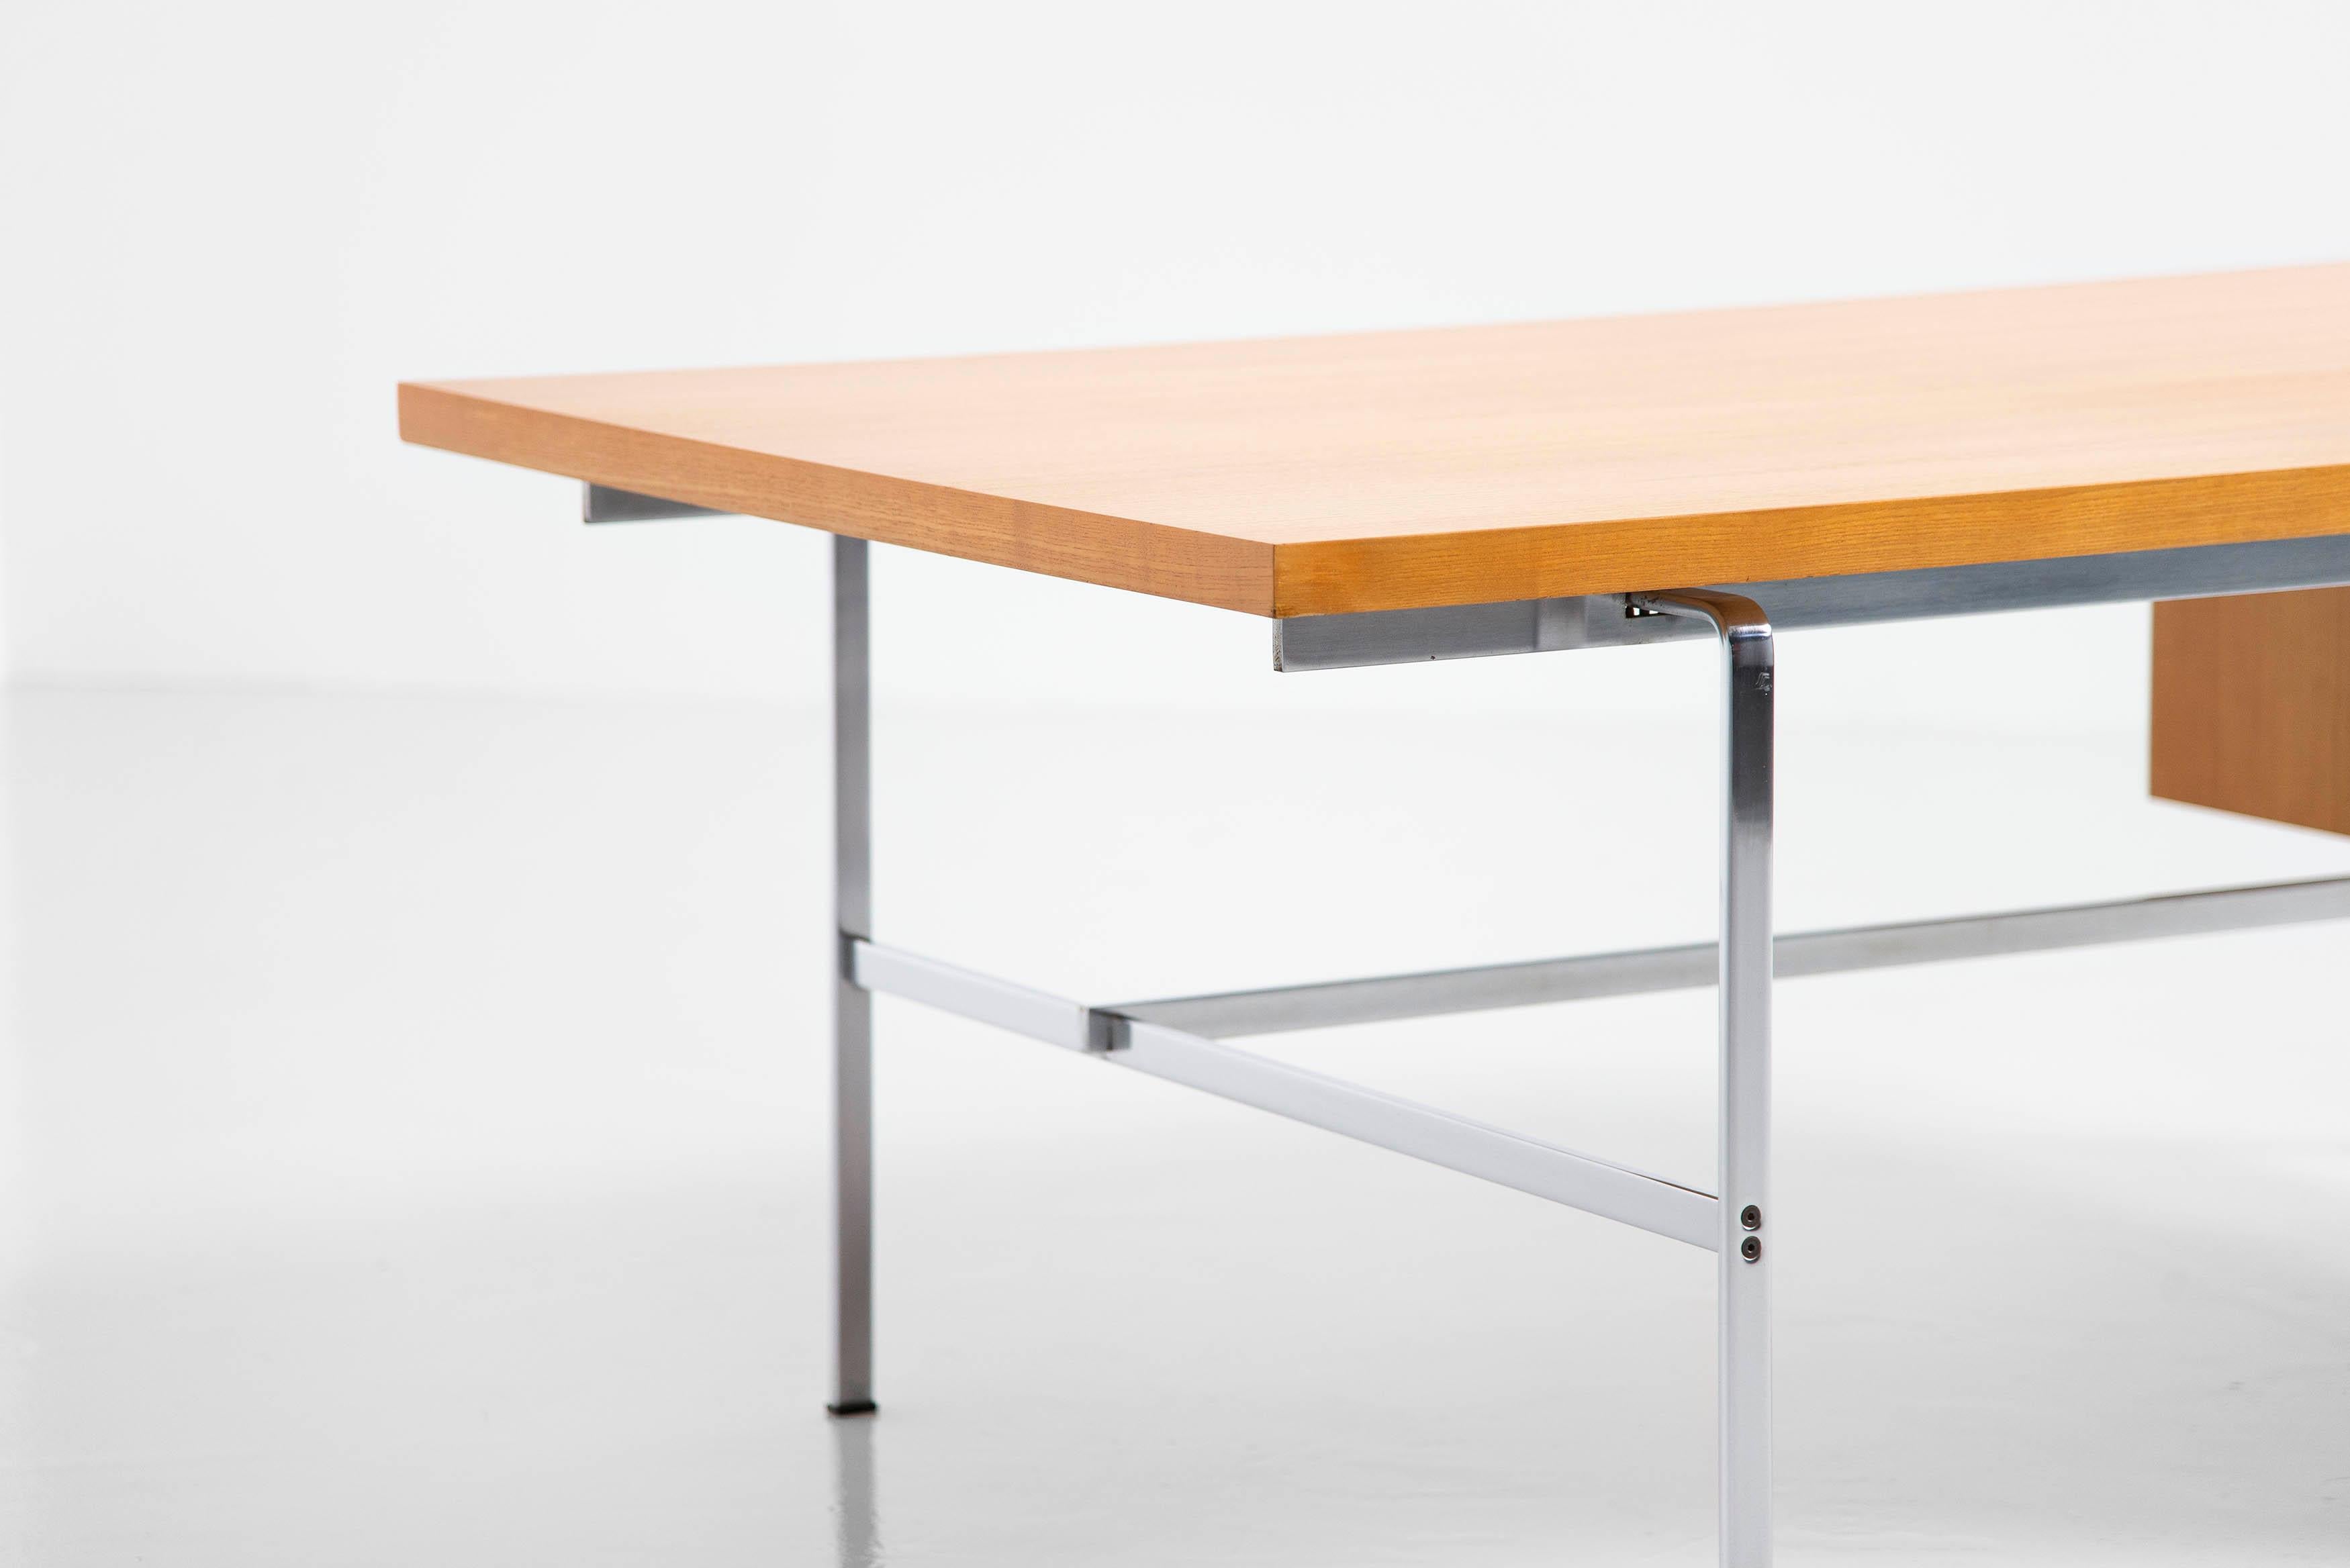 Large conference desk model ST196 designed by the duo Preben Fabricius and Jorgen Kastholm and manufactured by Kill International, Germany 1962. The use of different materials but fully in contrast with each other, make this desk special and still